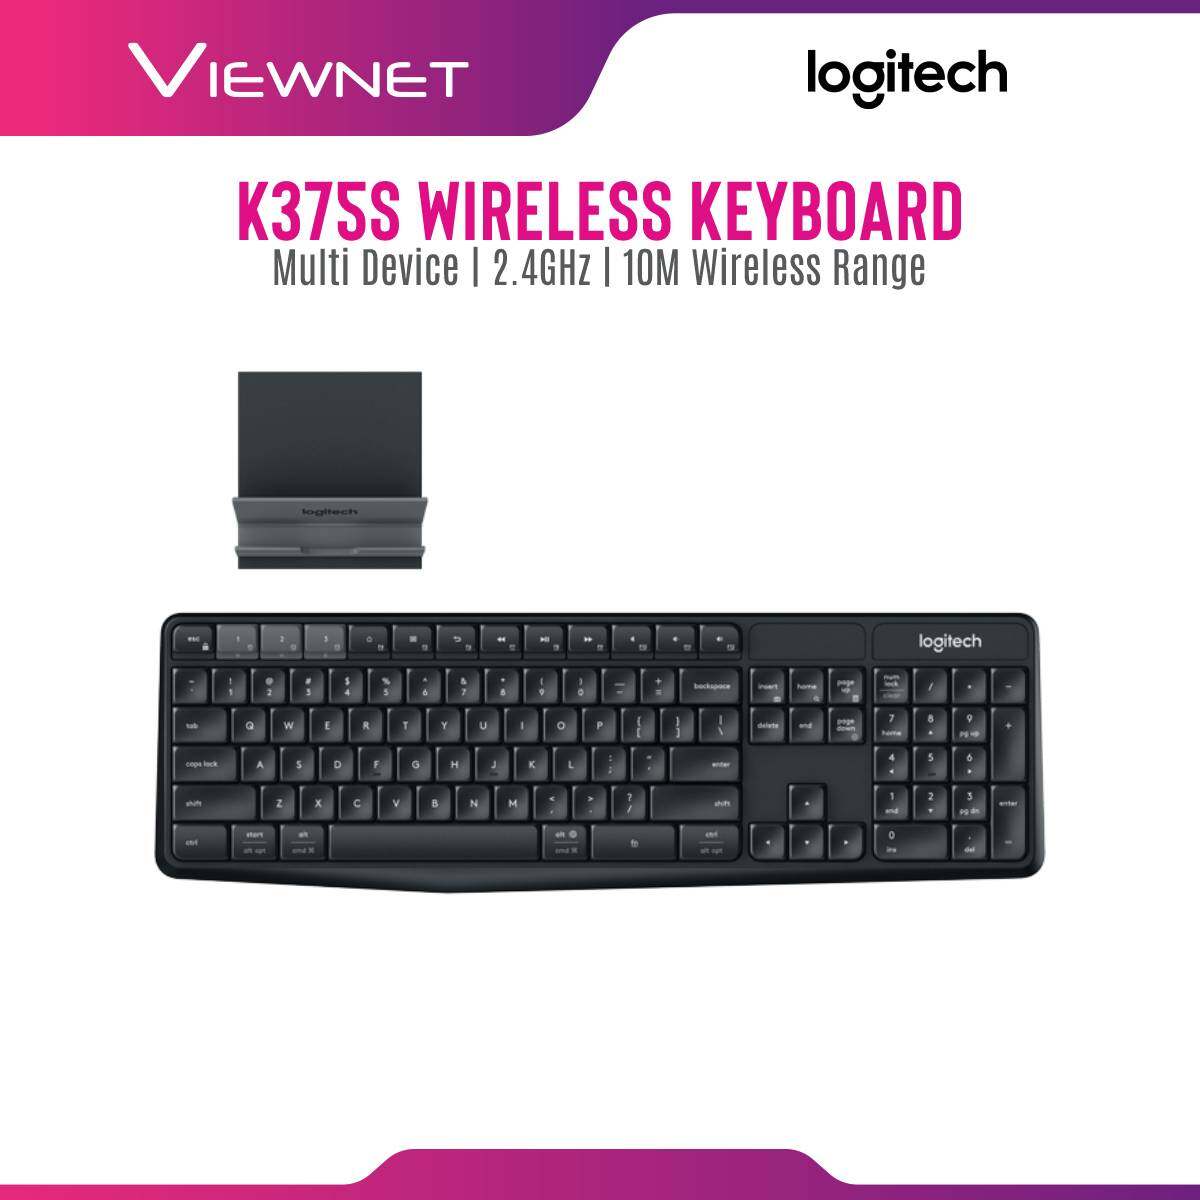 Logitech K375s Multi Device Keyboard with Quiet comfortable typing, Universal phone and tablet stand, Durable and hassle-free